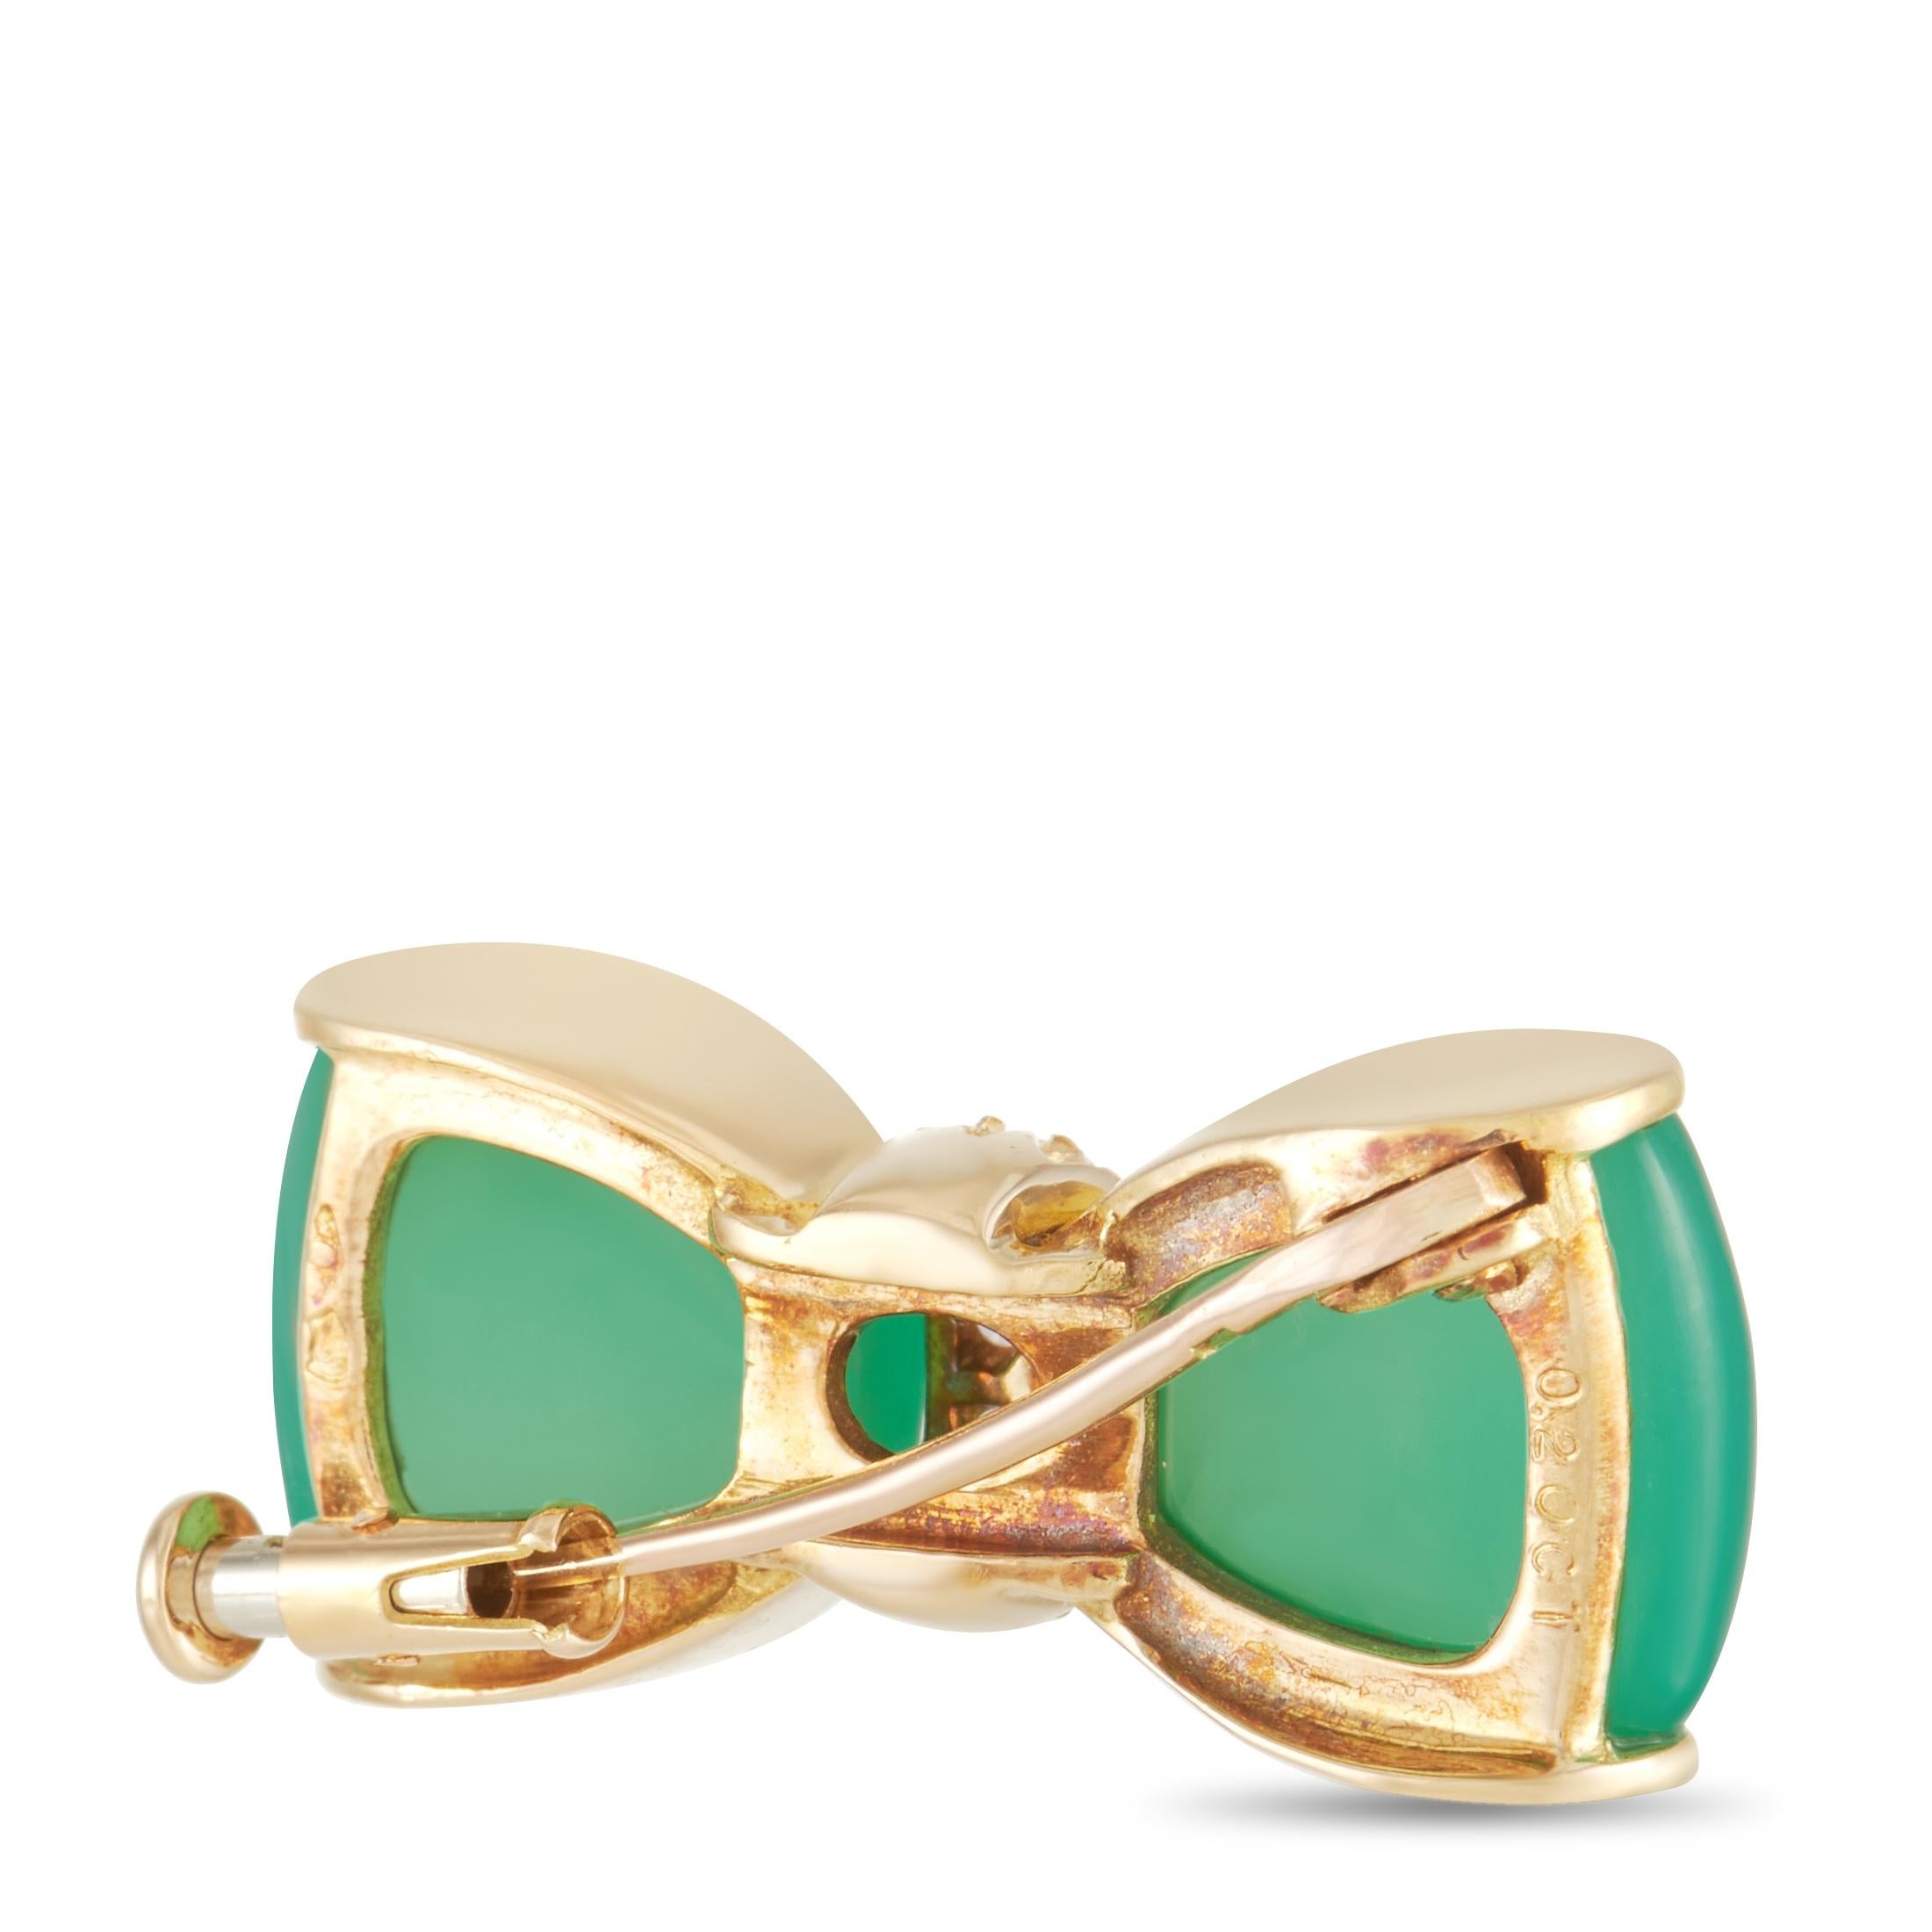 Bold colors and shimmering gemstones make this vintage bow tie brooch from Van Cleef & Arpels an elegant addition to any jewelry collection. Bright green chrysoprase gives this brooch a captivating color, while shimmering round-cut diamonds in the